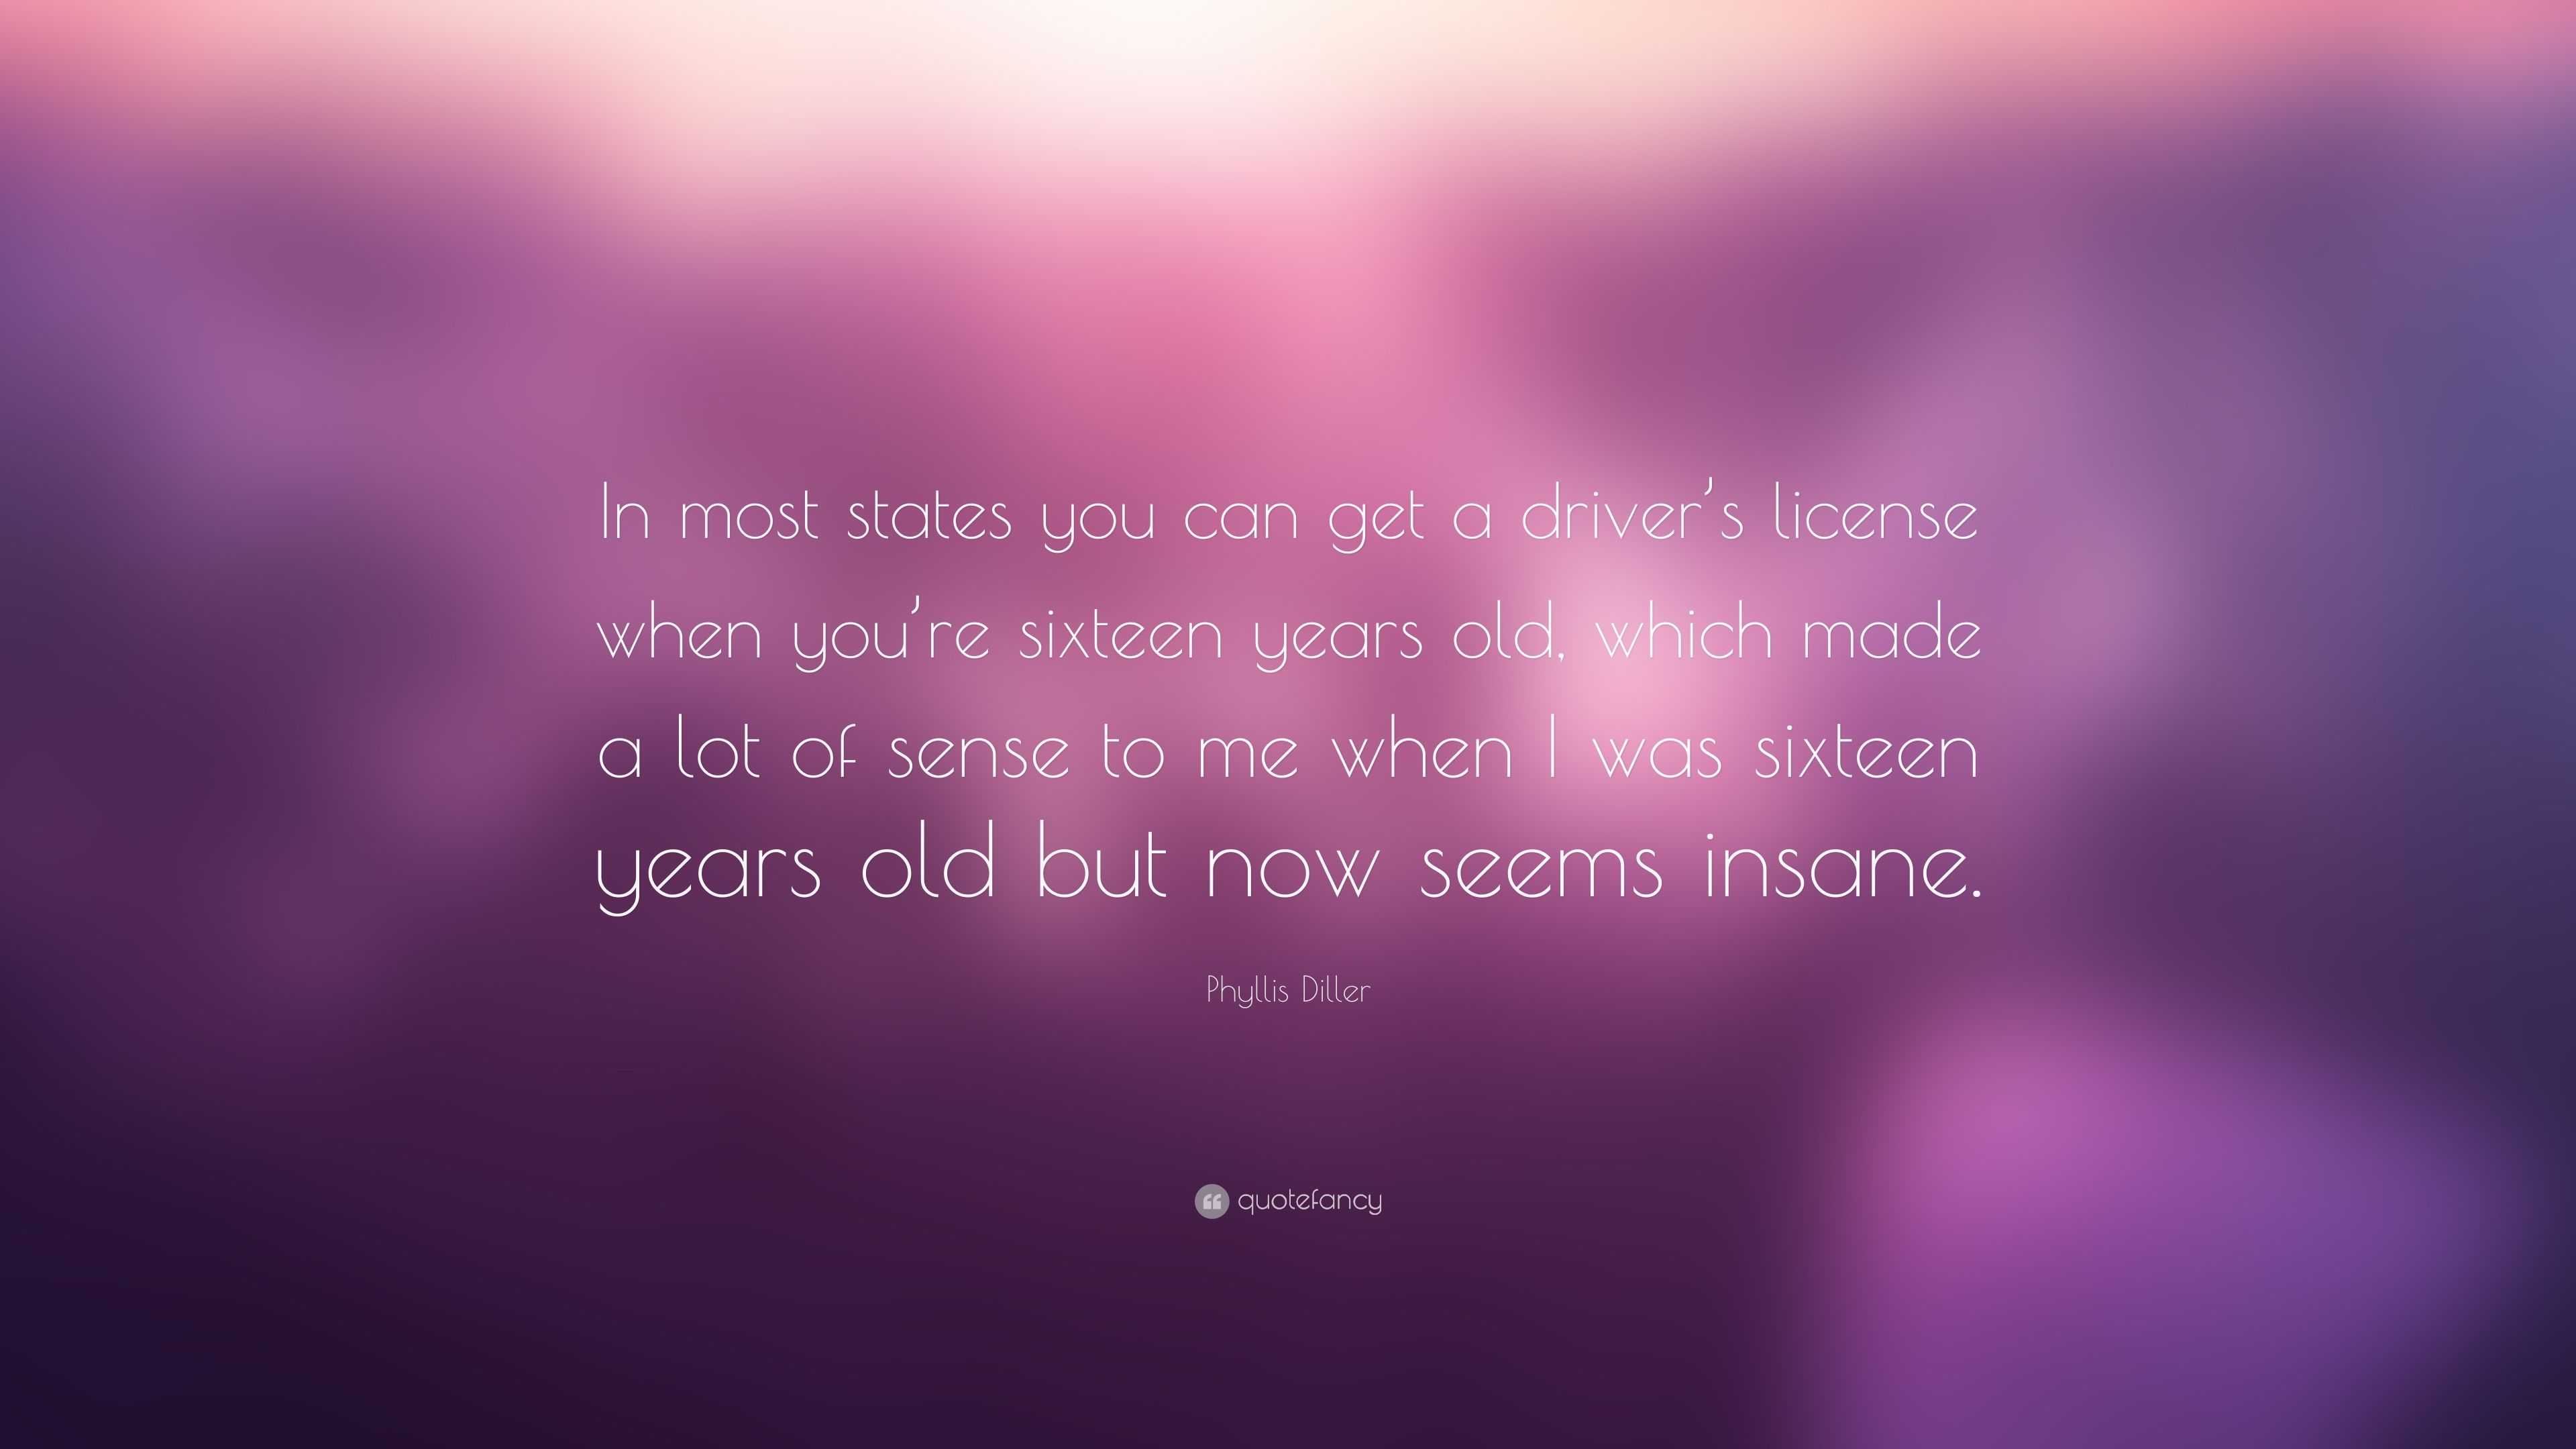 Phyllis Diller Quote: “In most states you can get a driver’s license ...